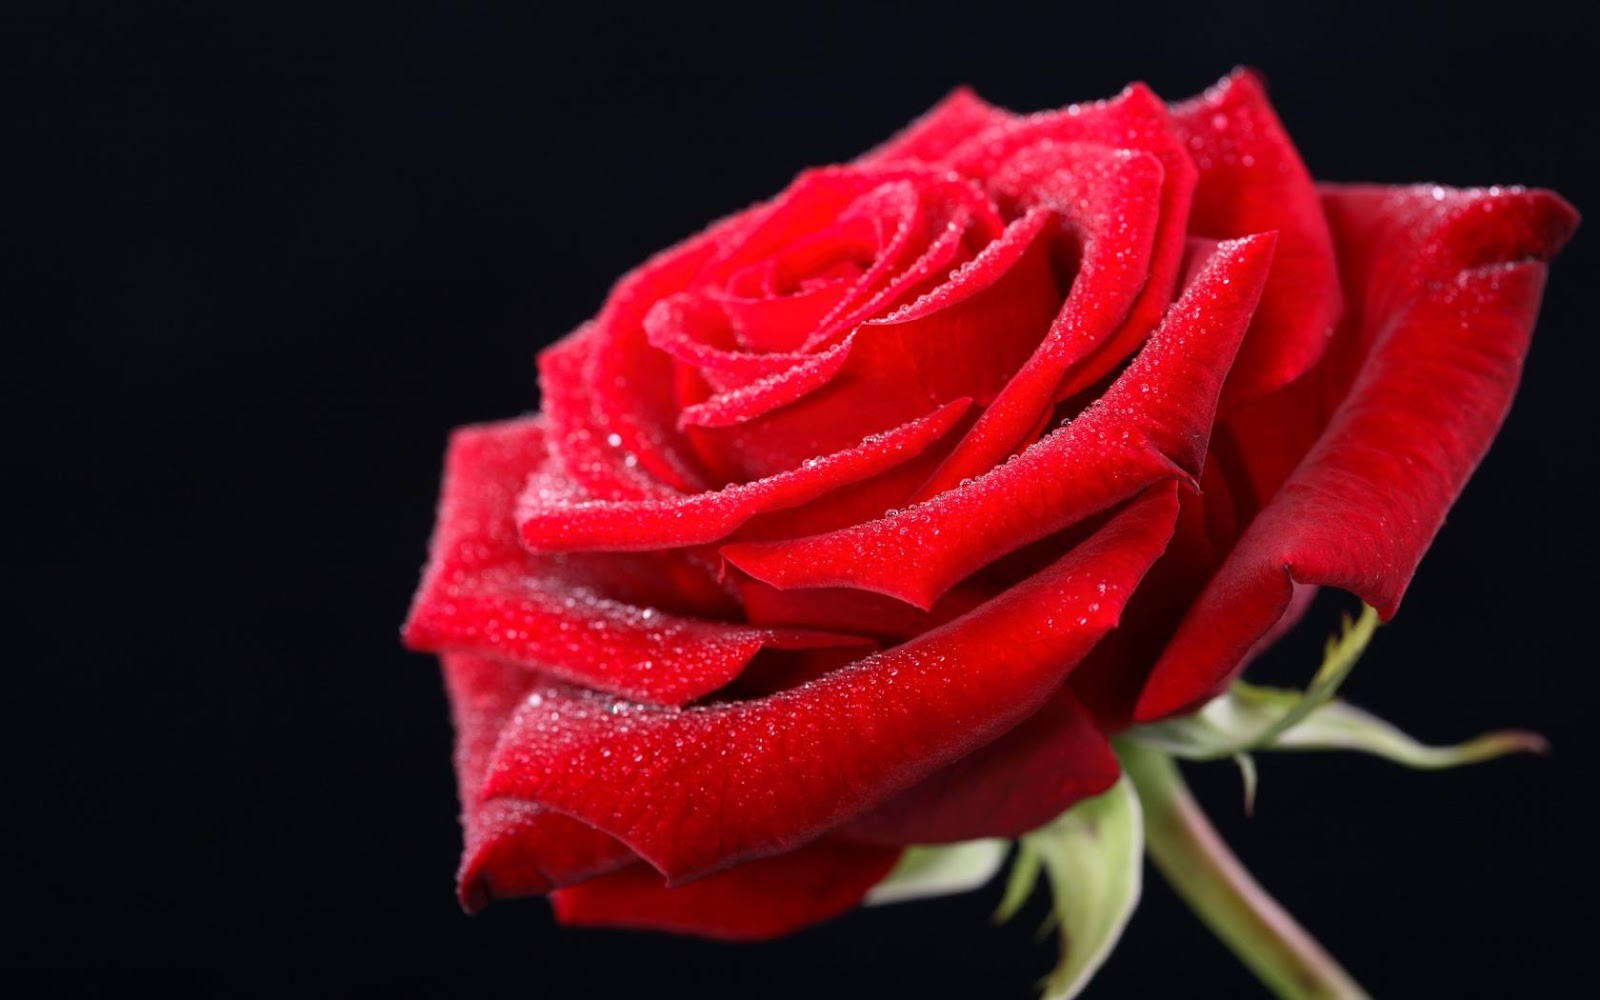 Red rose HD wallpaper as a gift on on valentines day 2016 1600x1000